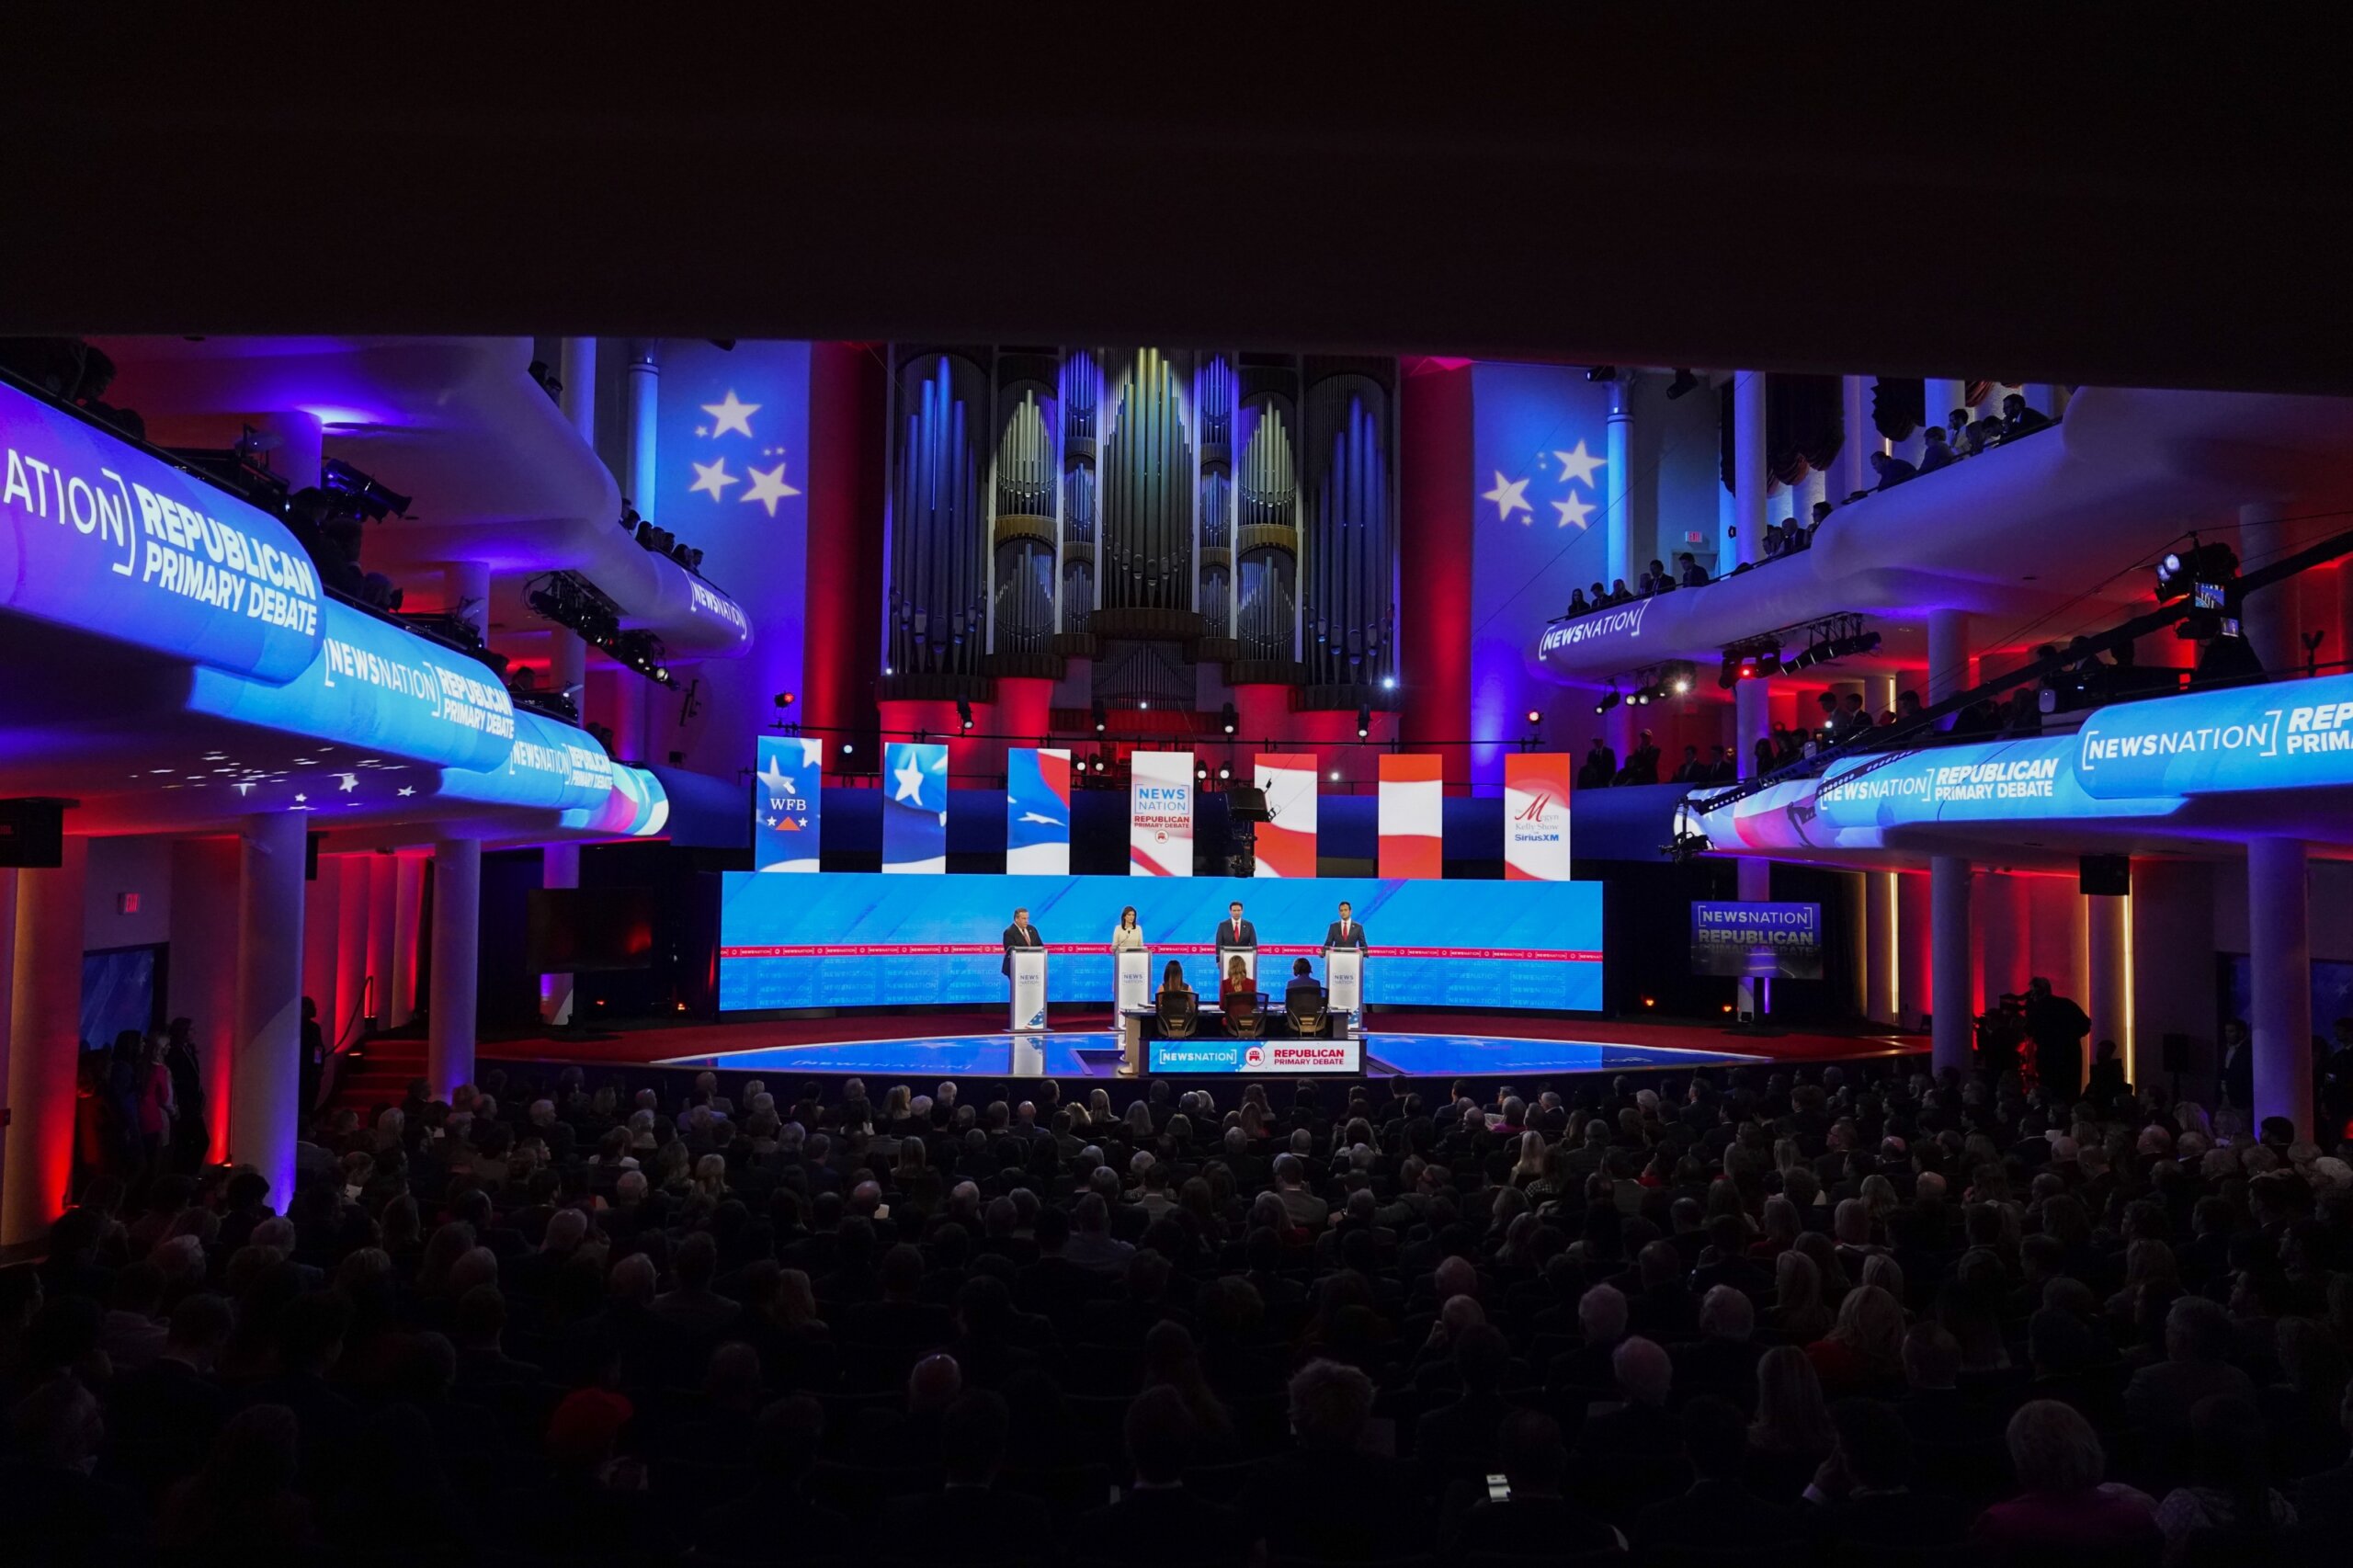 Two networks announce GOP presidential debates just days apart at same